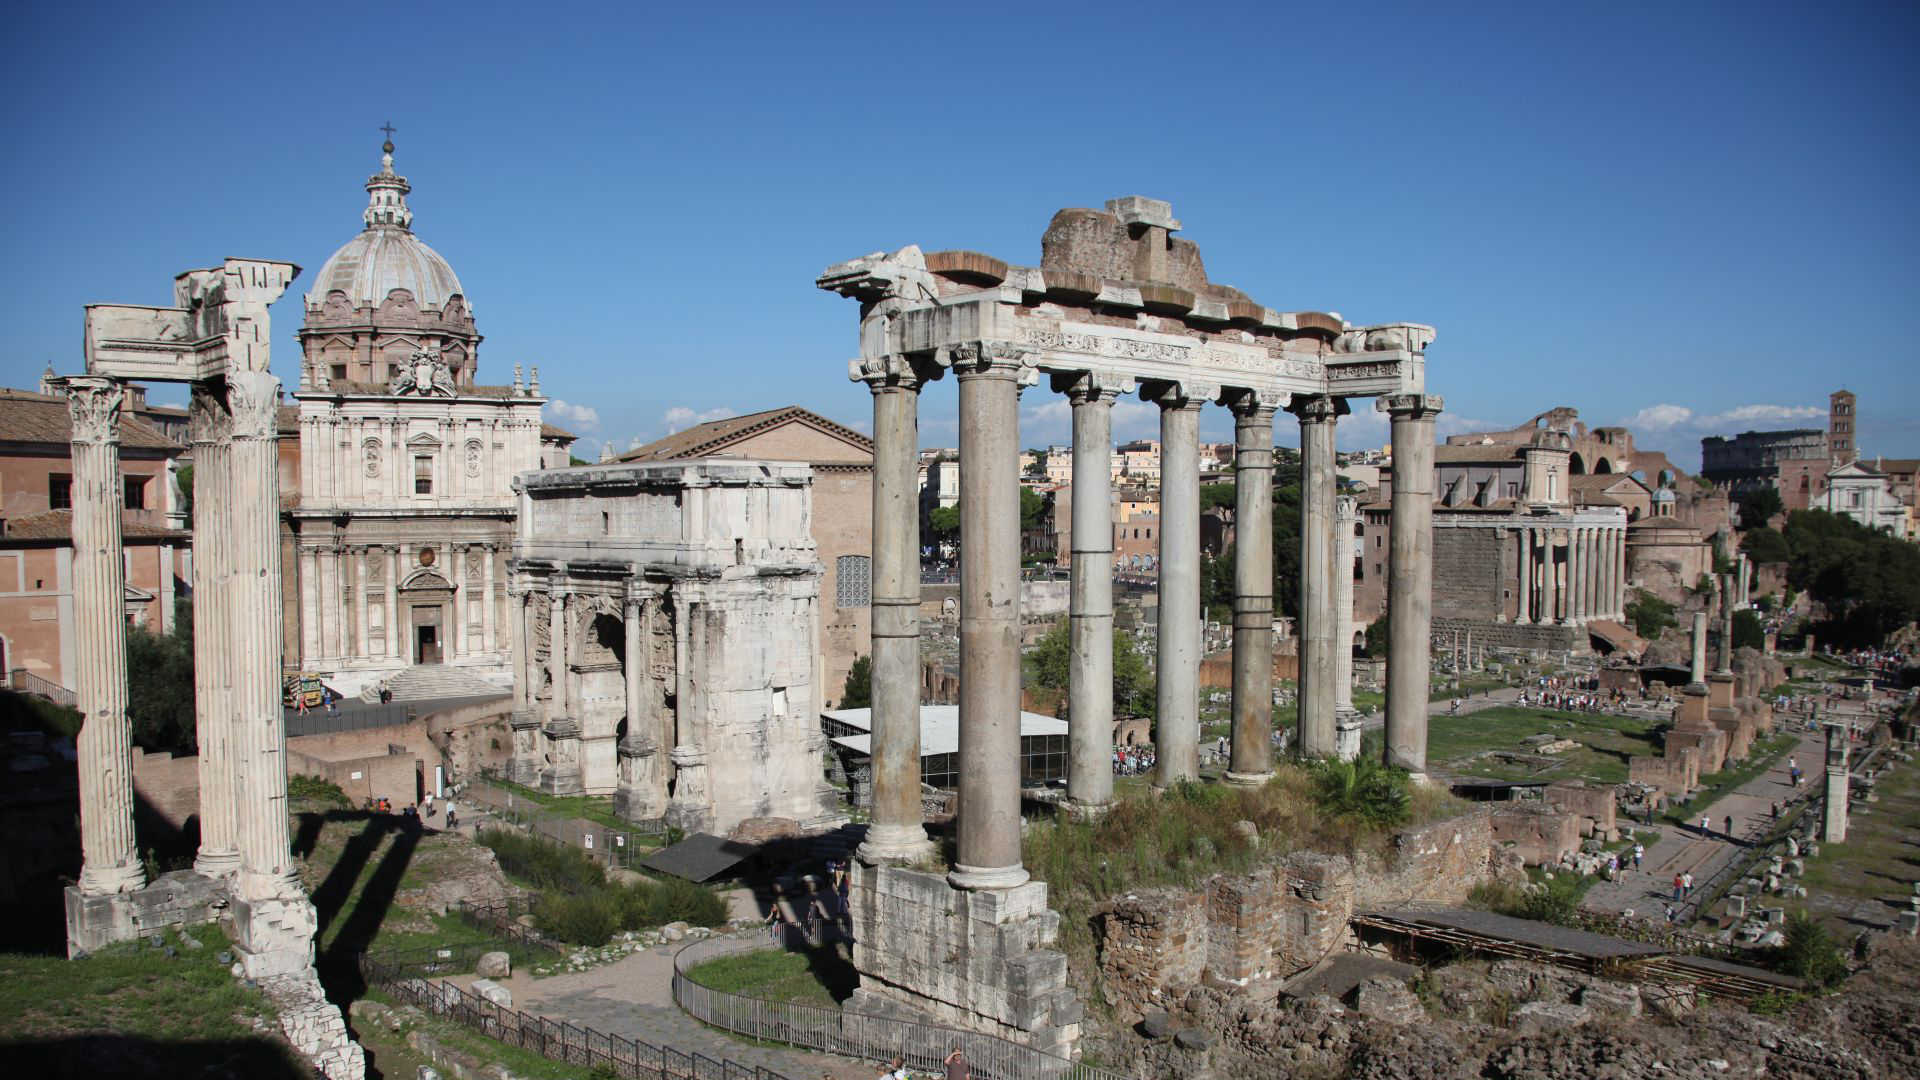 An image of ruins in Rome